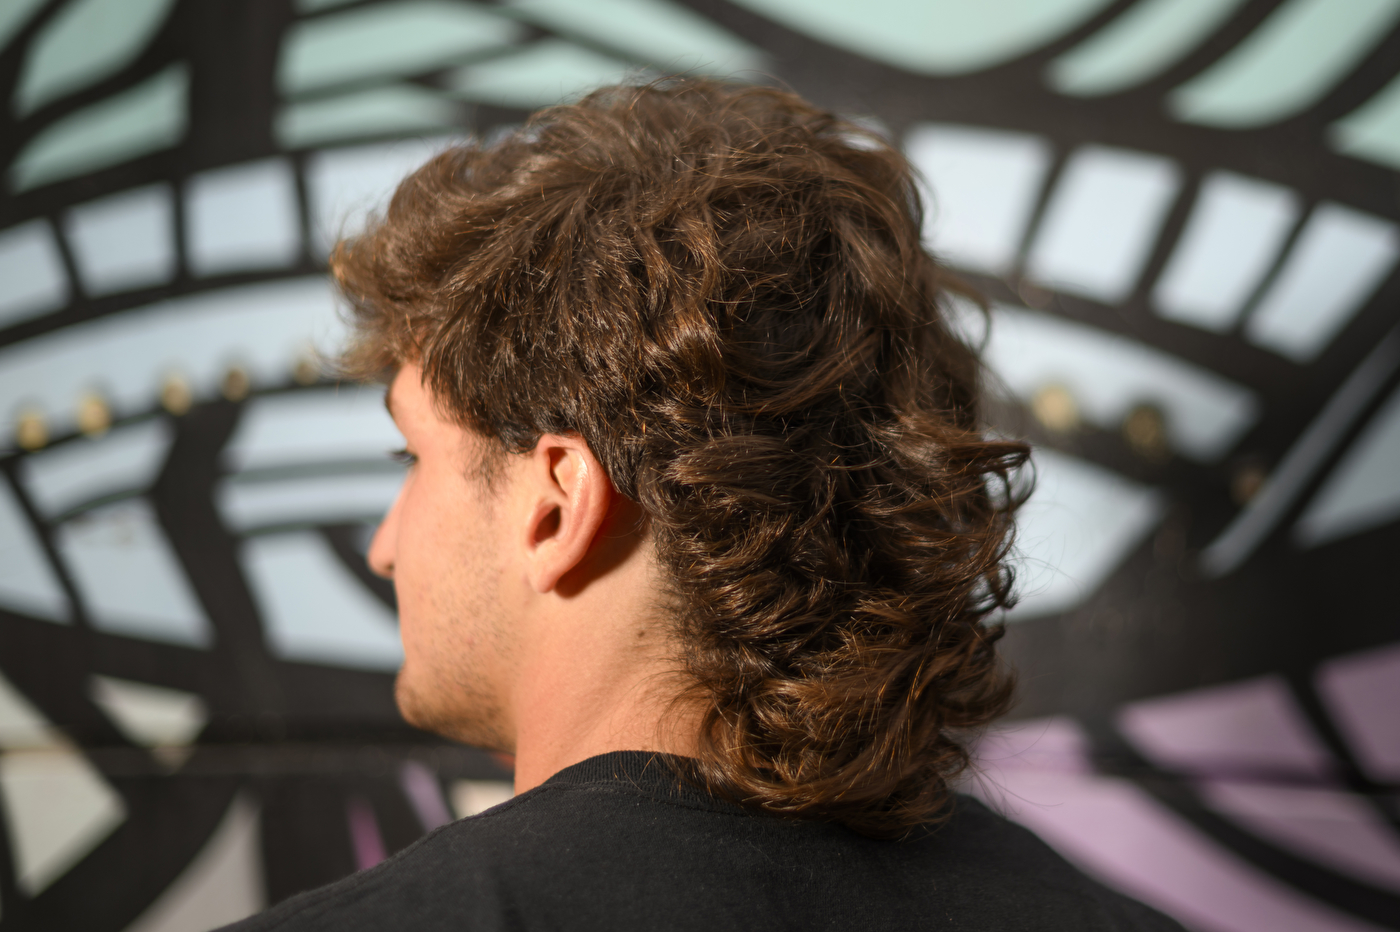 A person has their head slightly turned to the left, displaying the side of their mullet. 